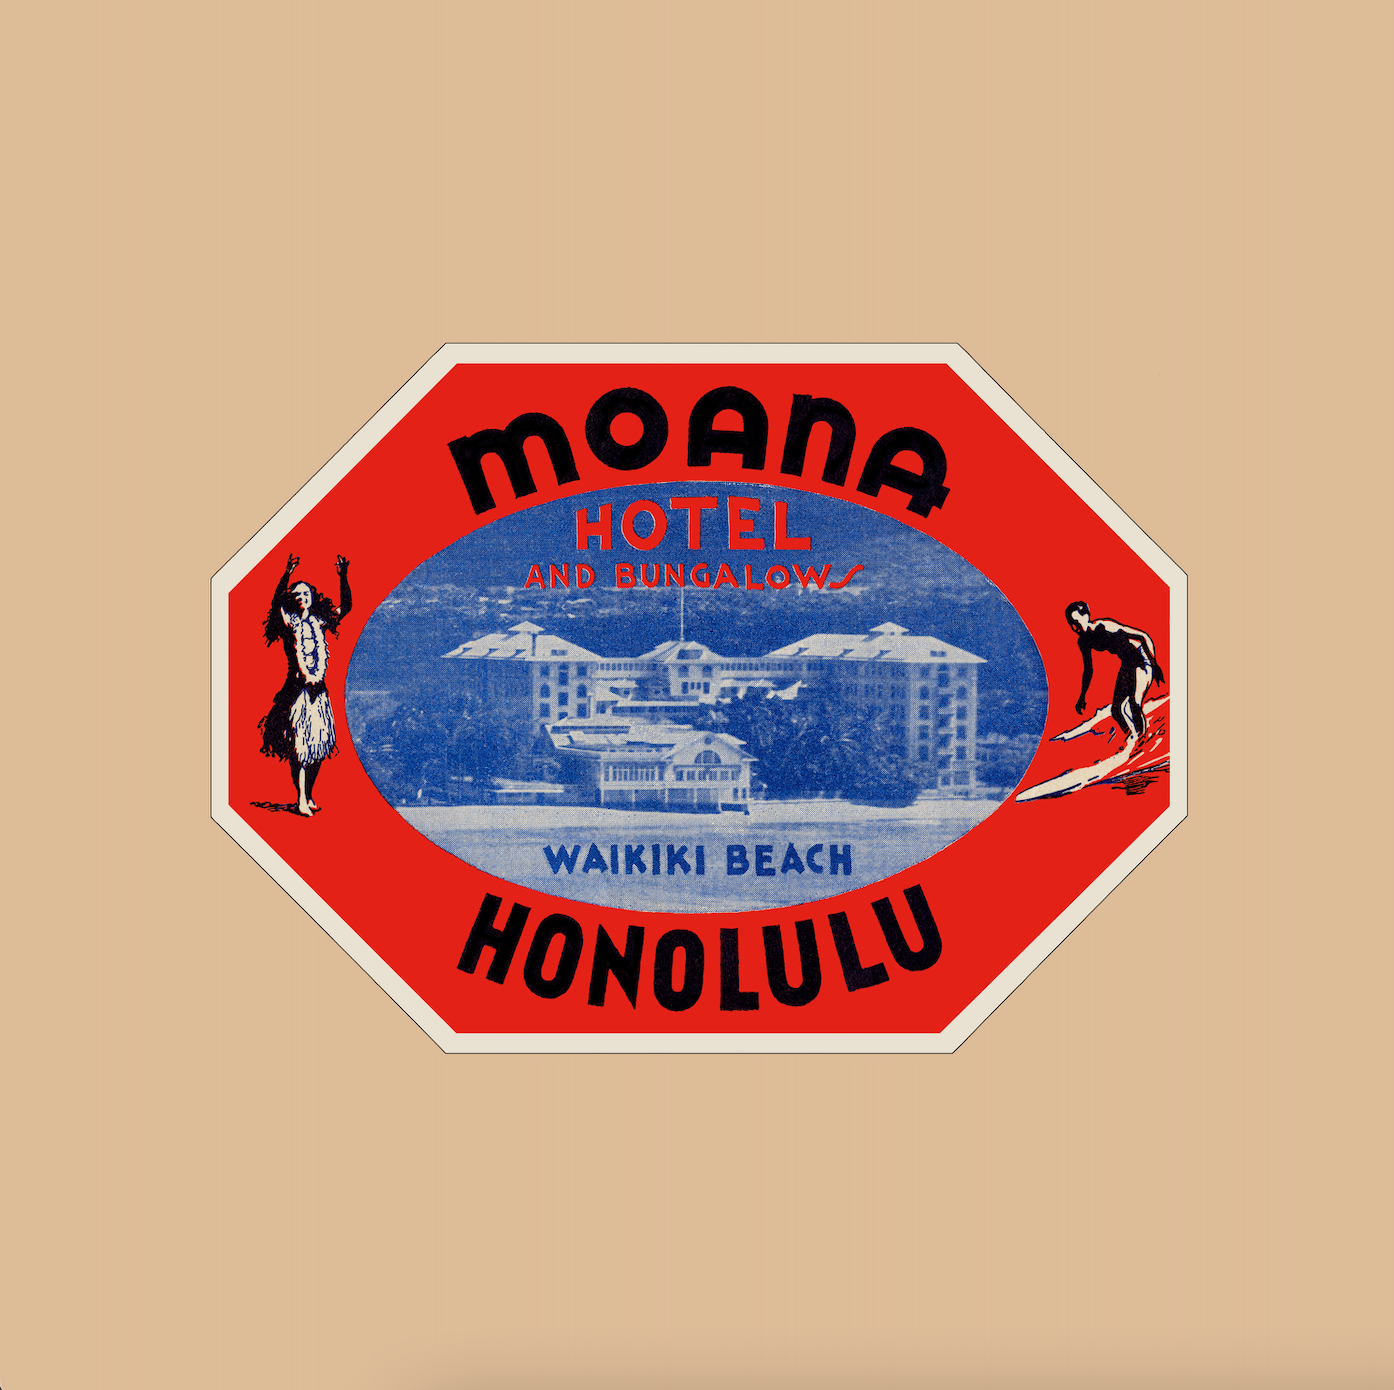 Bright orange octagon shaped tag with Moana Hotel and Bungalows, Waikiki Beach Honolulu written on it. There is a photograph in blue of the hotel and a hula dance on the left and surfer on the right. Graphic sits on a bright blue background.